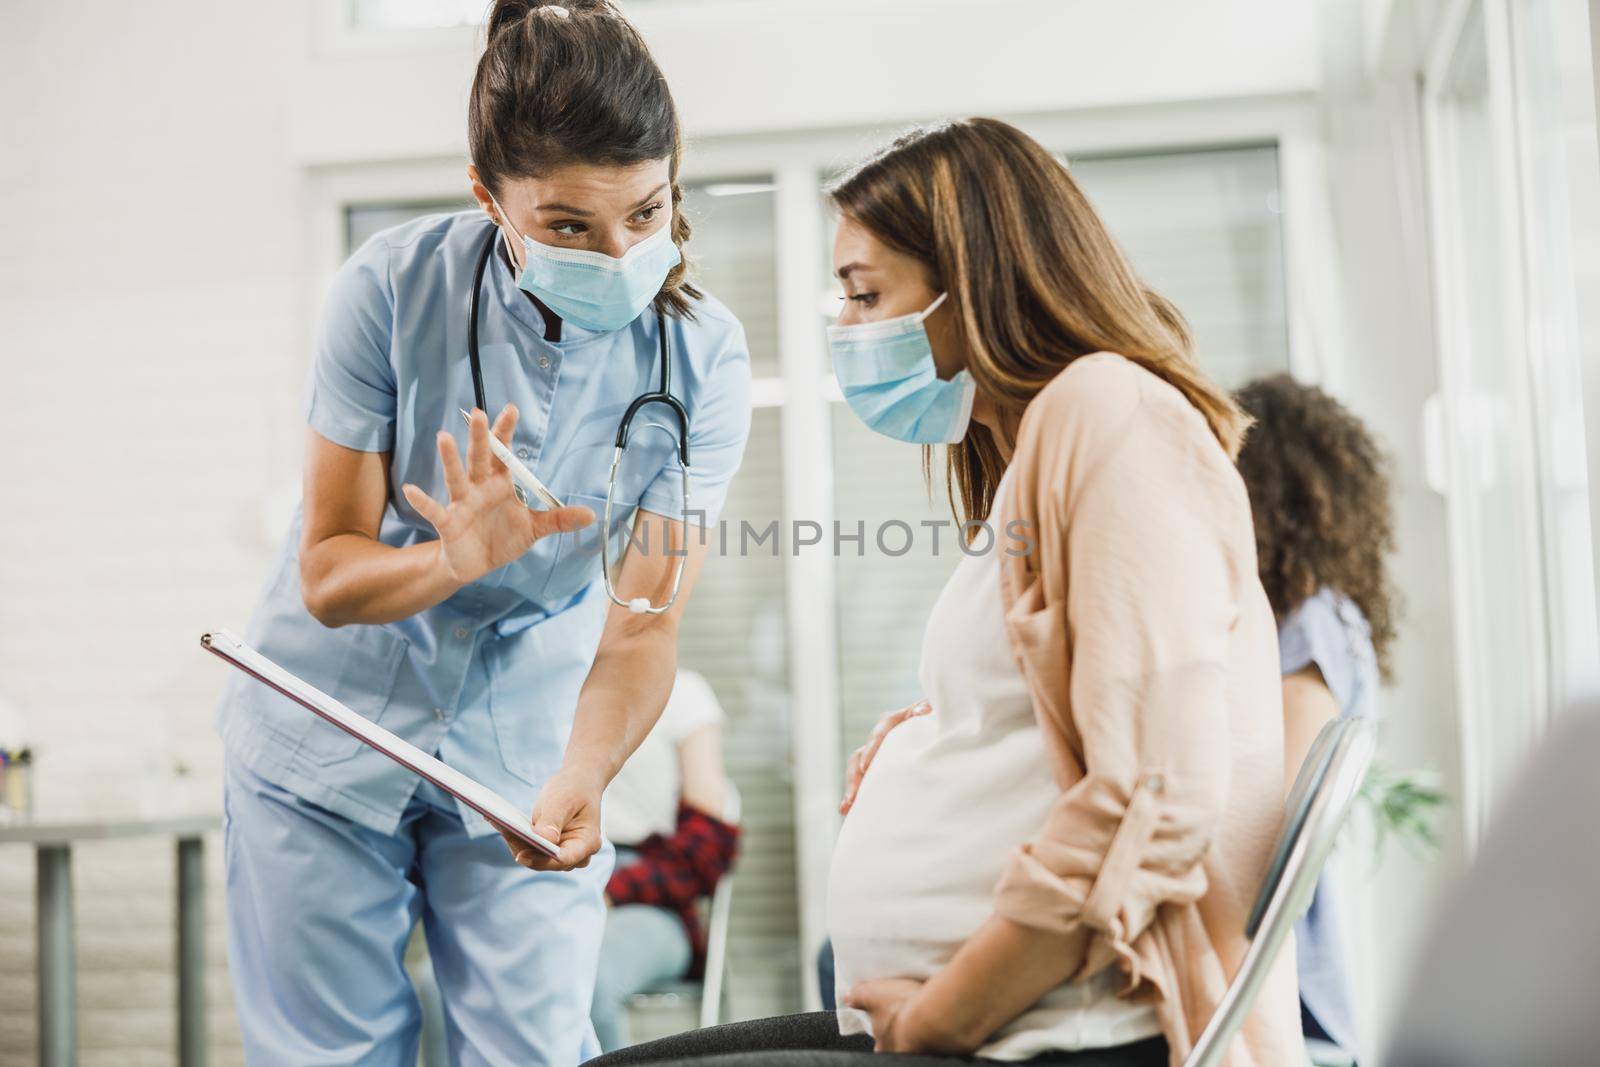 Nurse talking to young pregnant woman and analyzing medical report before before vaccination against coronavirus.